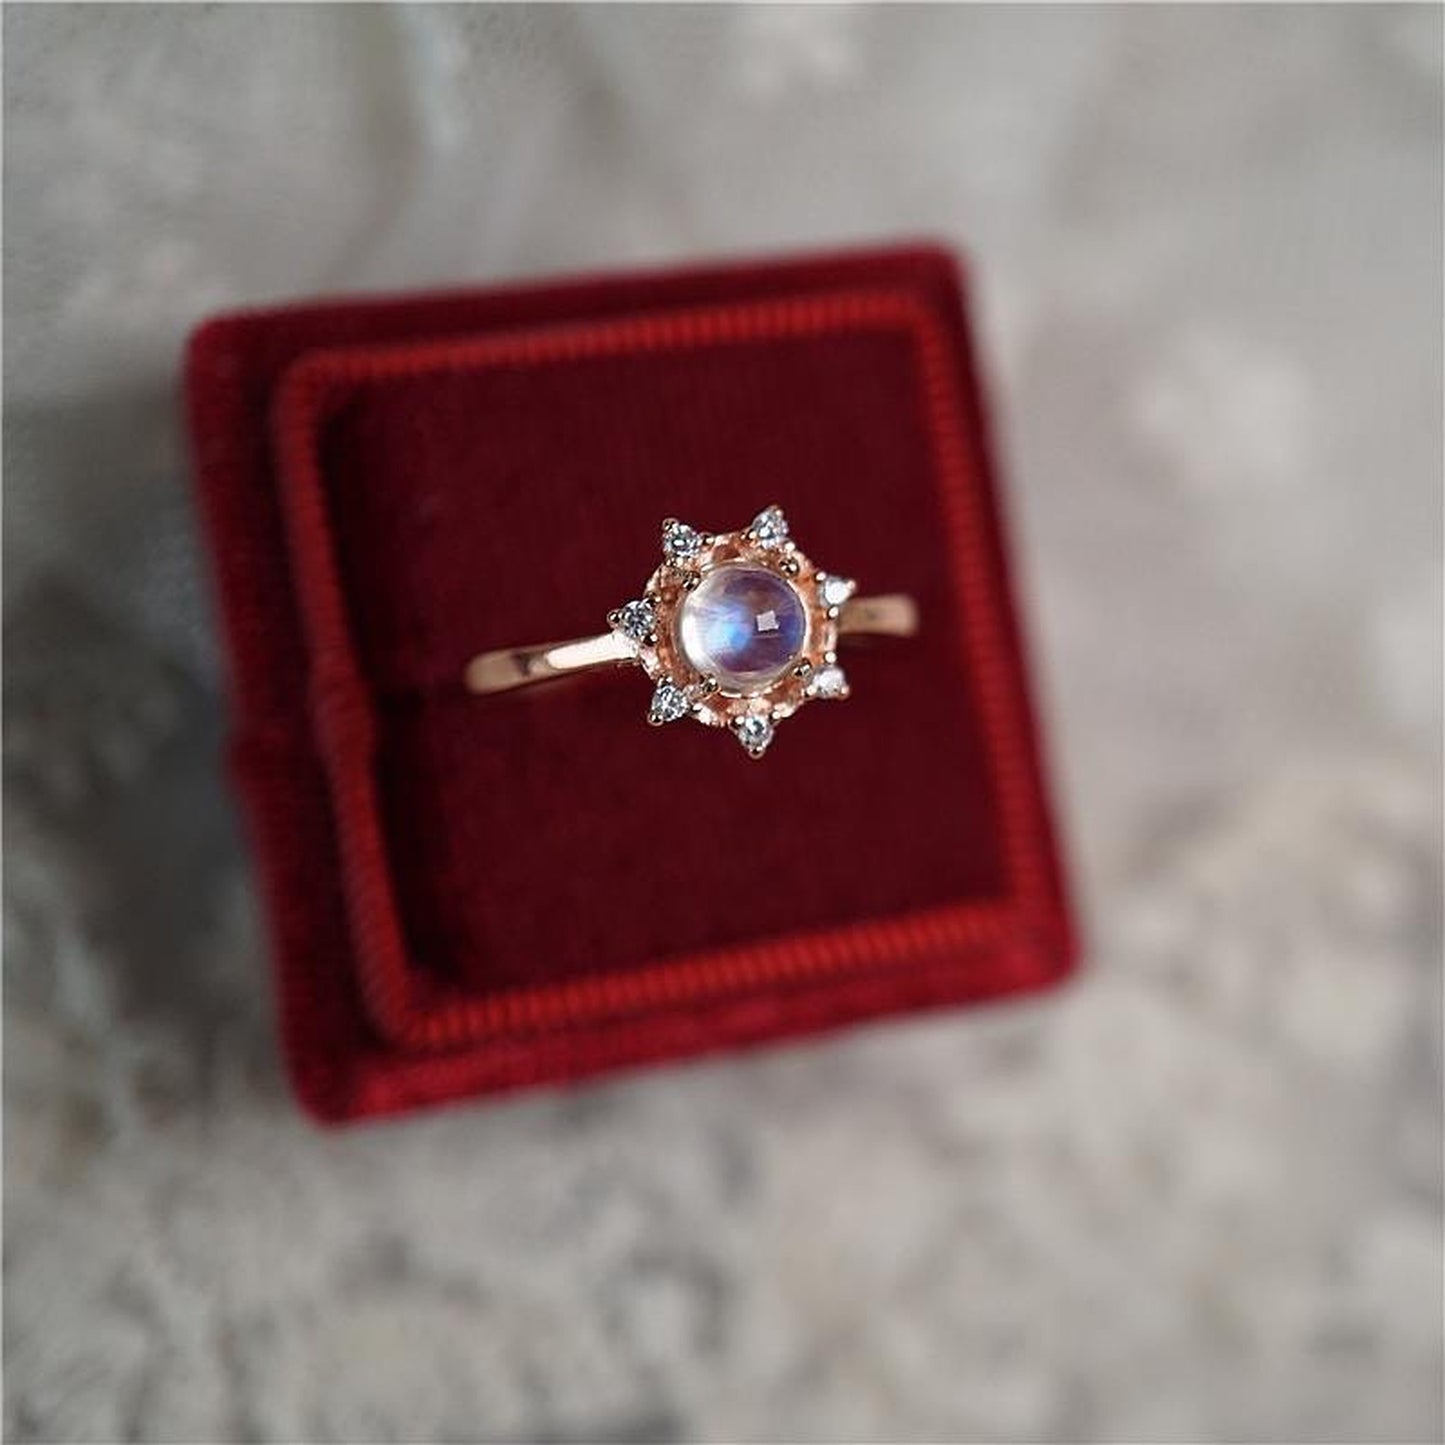 Rose gold moonstone ring, Flower gemstone ring, Snowflake ring, Statement birthstone rings, Opal rings, Cz floral rings, Birthday ring gifts